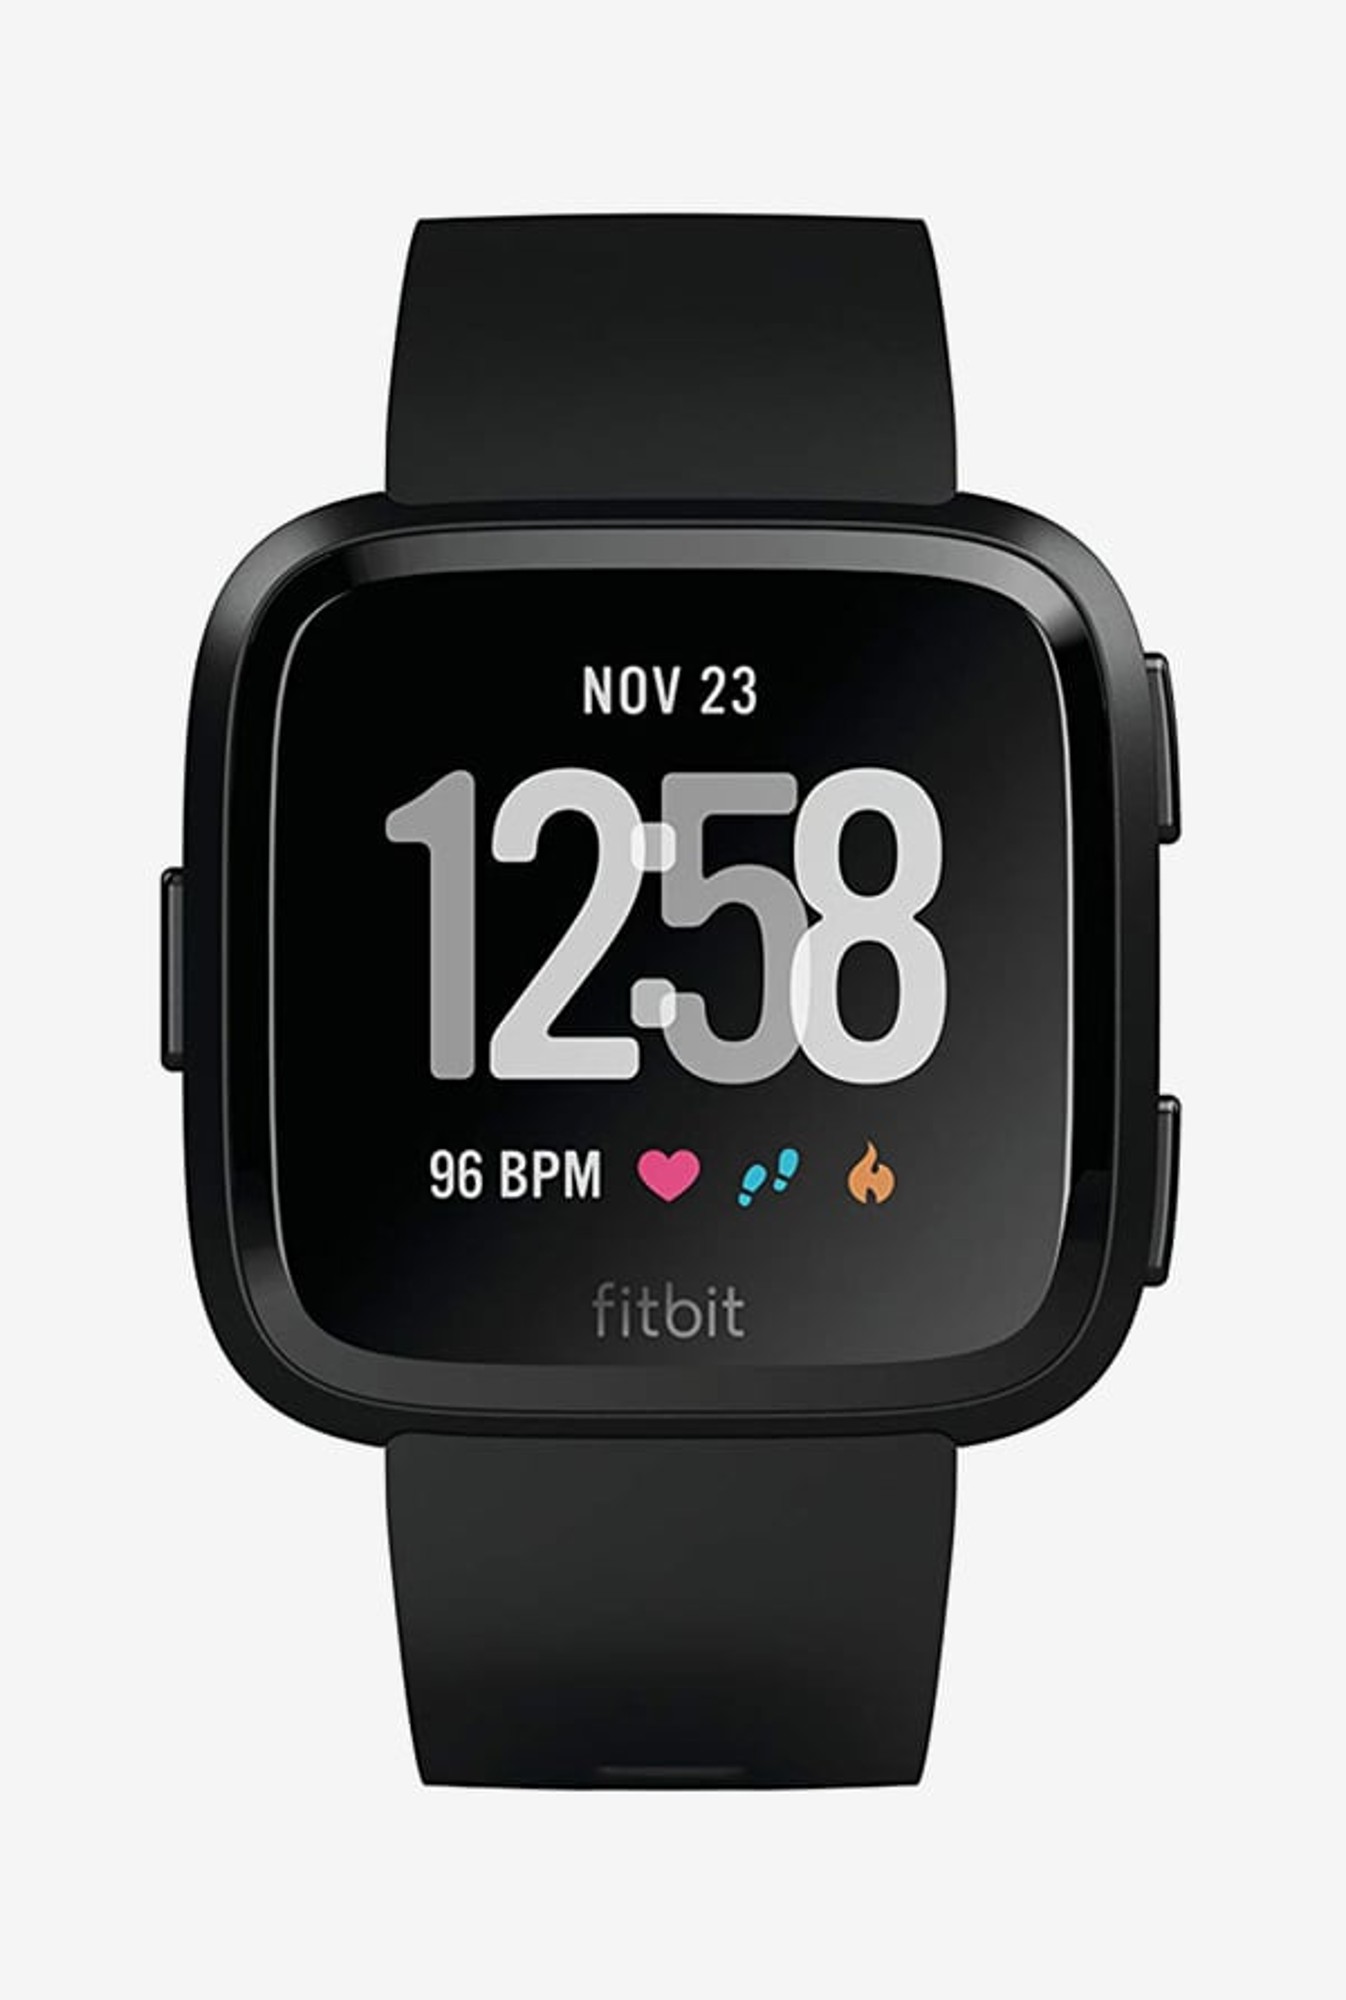 fitbit with altimeter